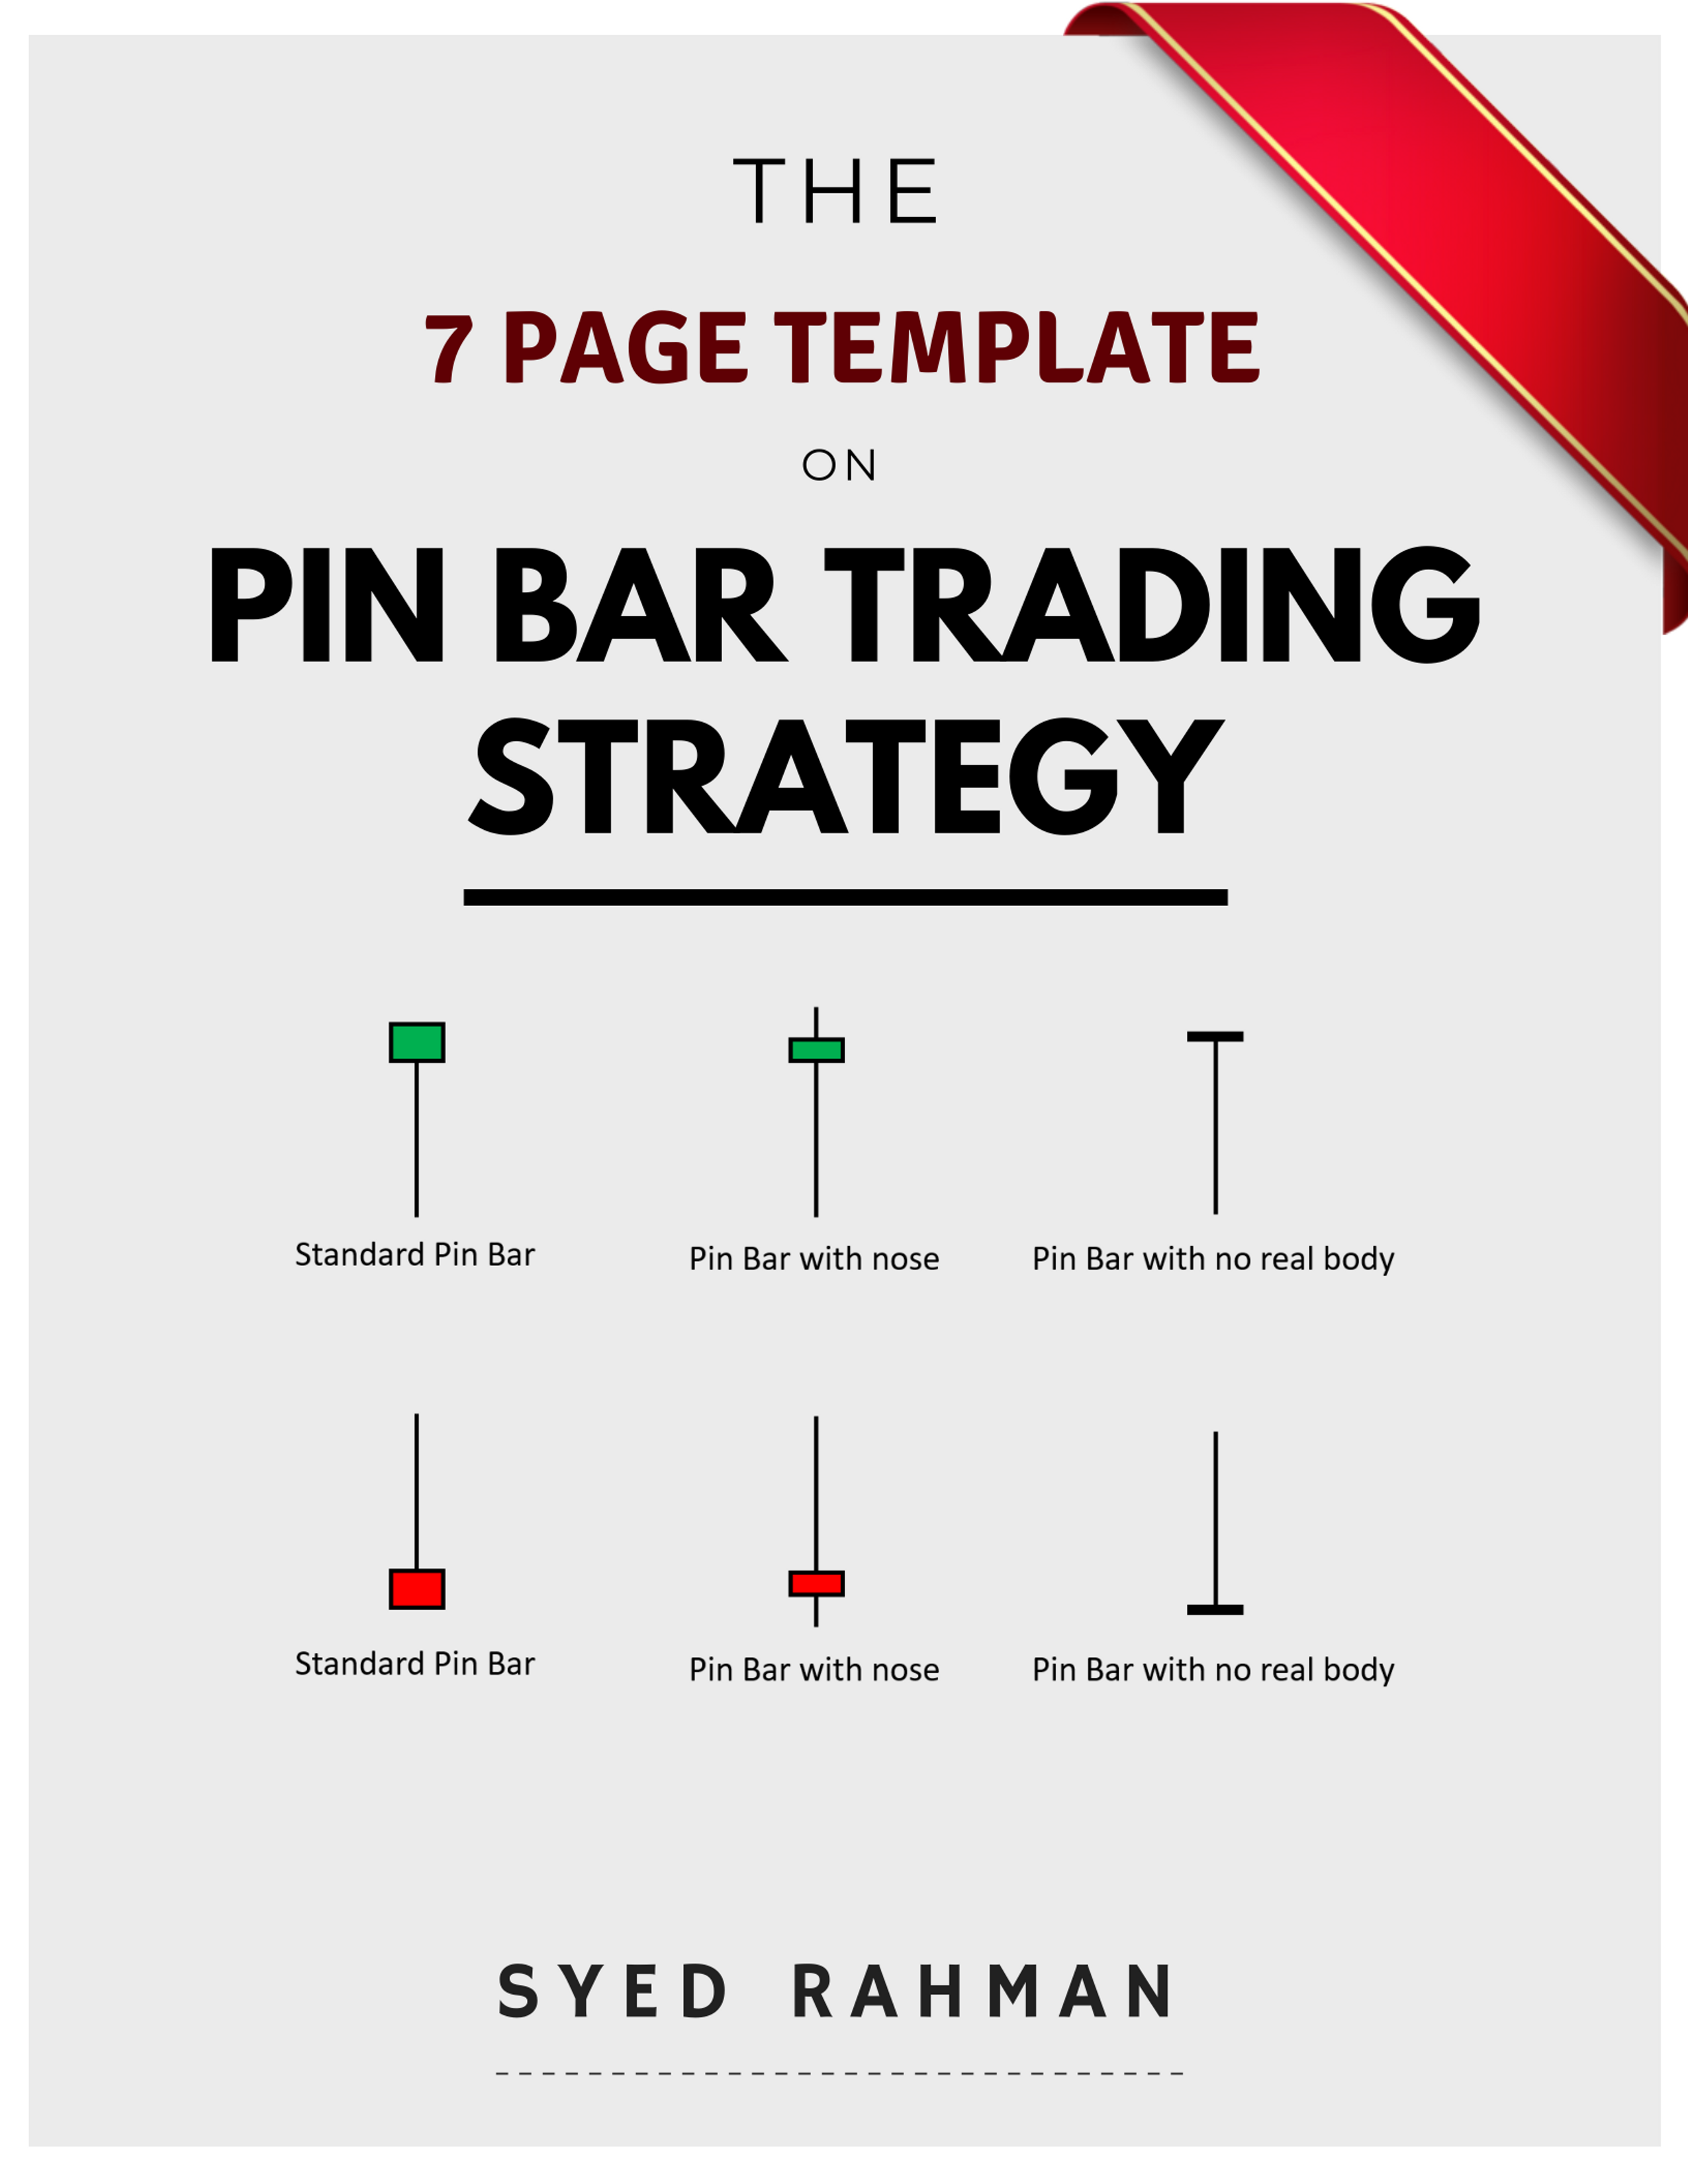 Template on Pin Bar Trading Stratgey   The Syed Rahman